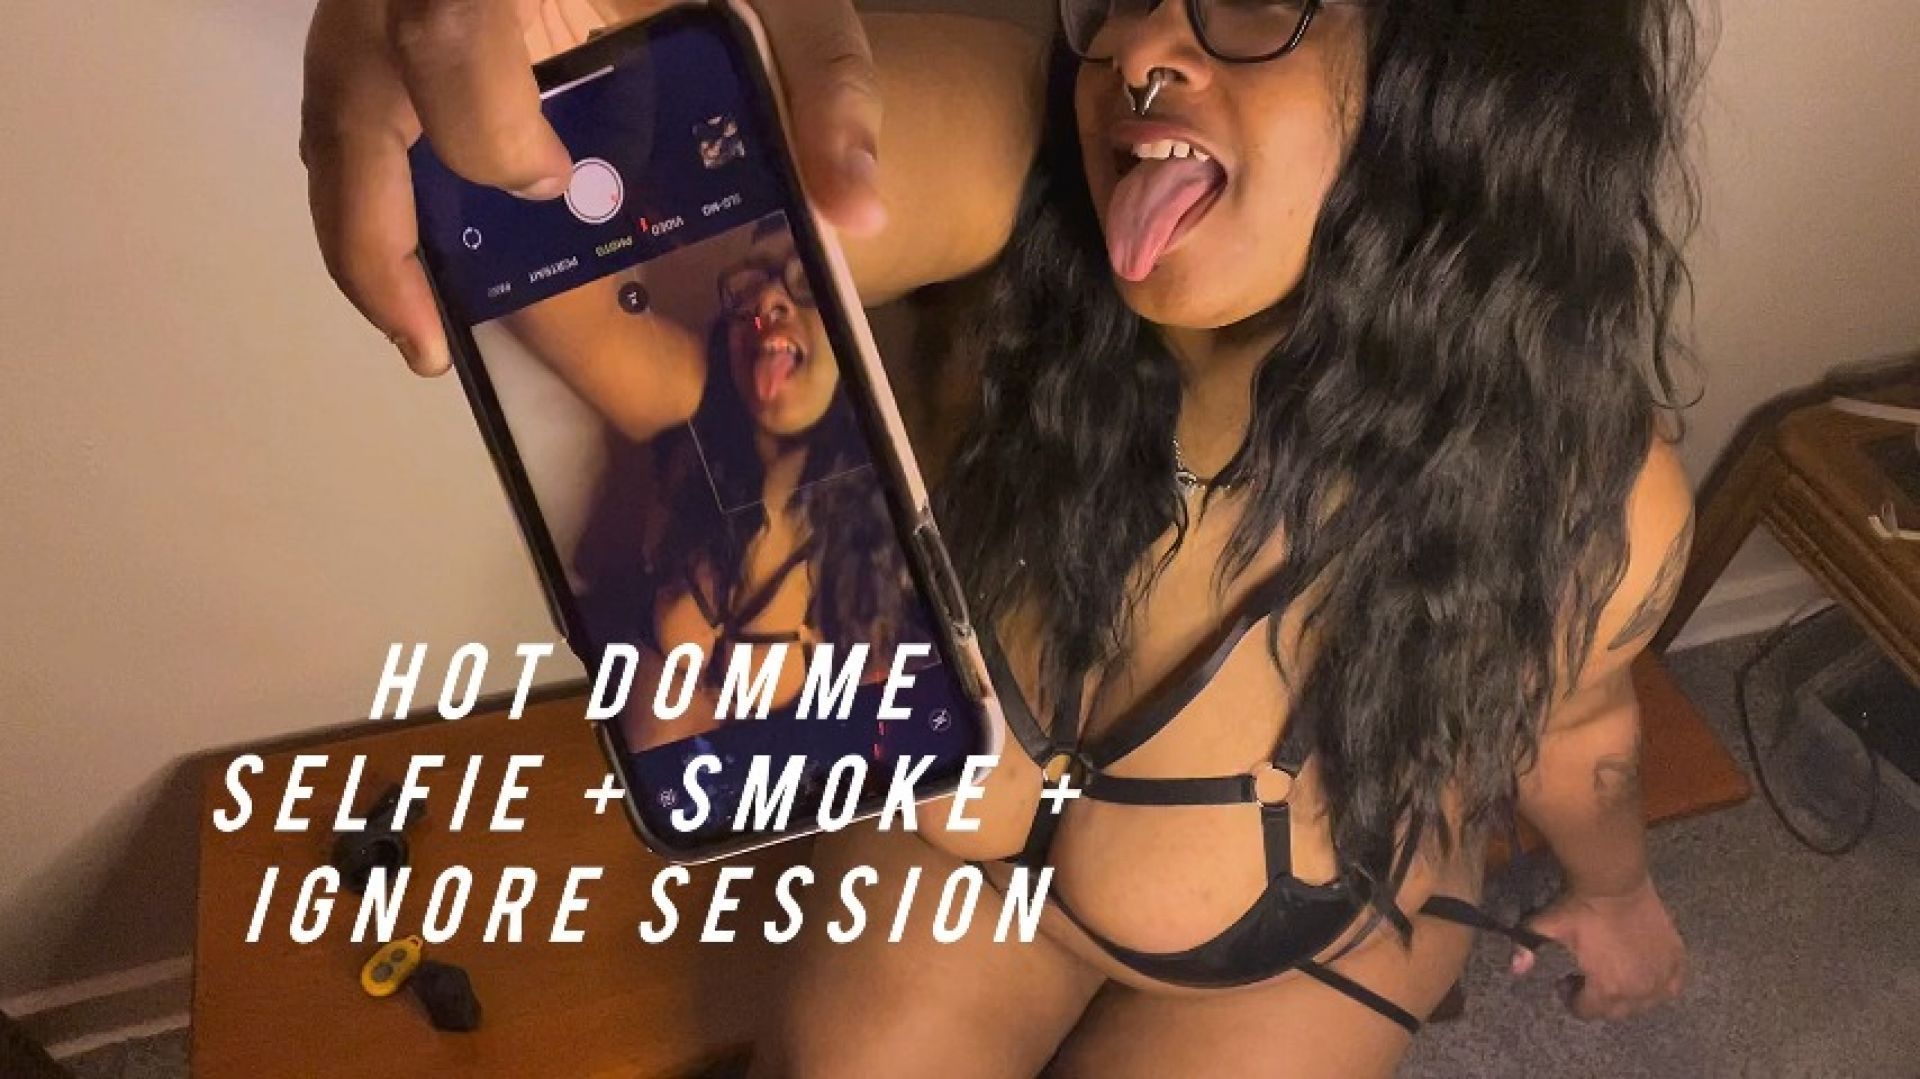 Hot Domme Ignores You - Selfie + Smoke Session